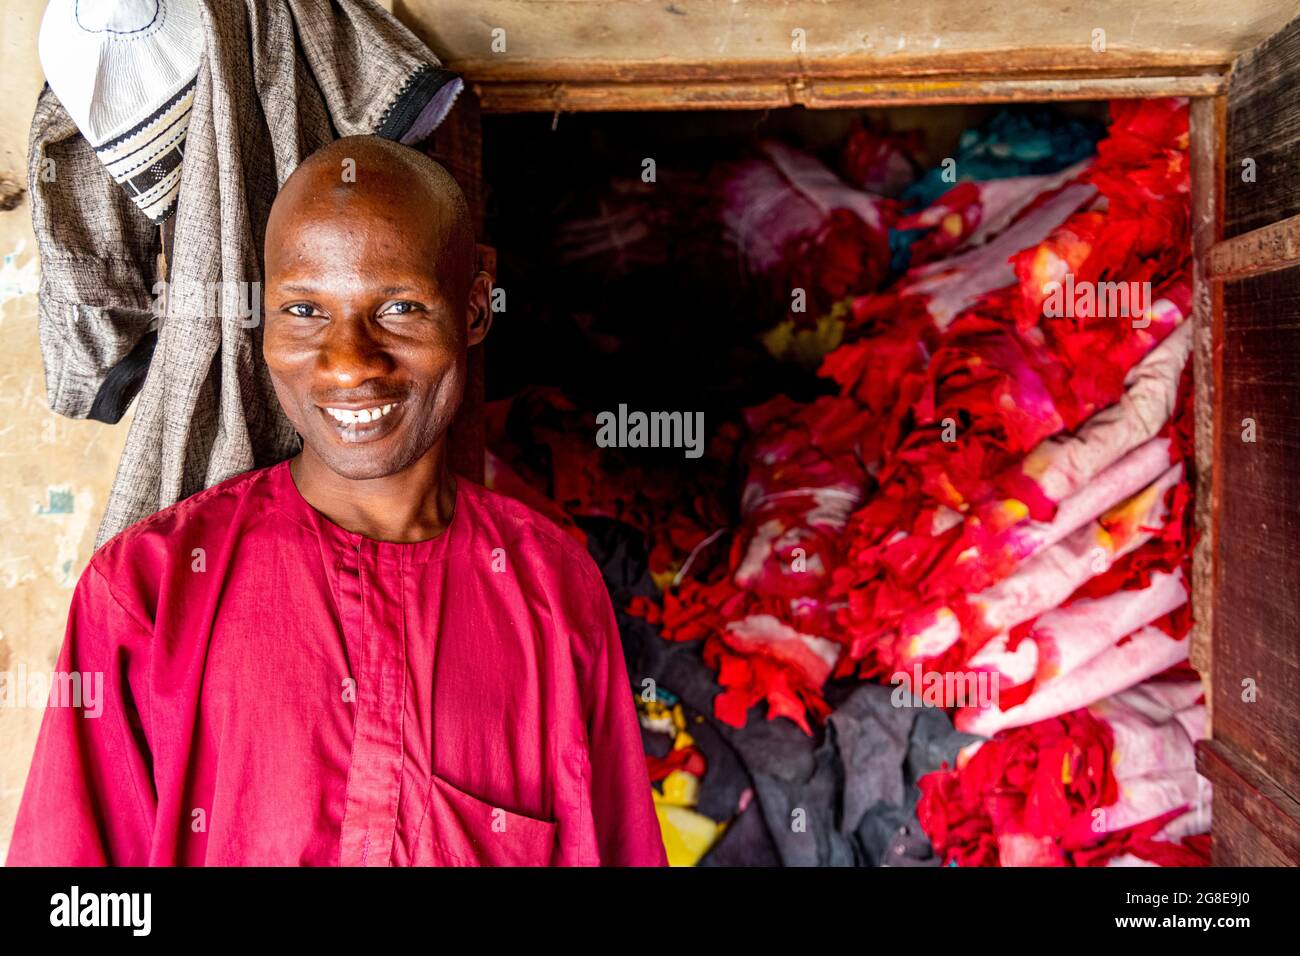 Shopkeeper before his shop full of colourful leather, Kano, Kano state, Nigeria Stock Photo